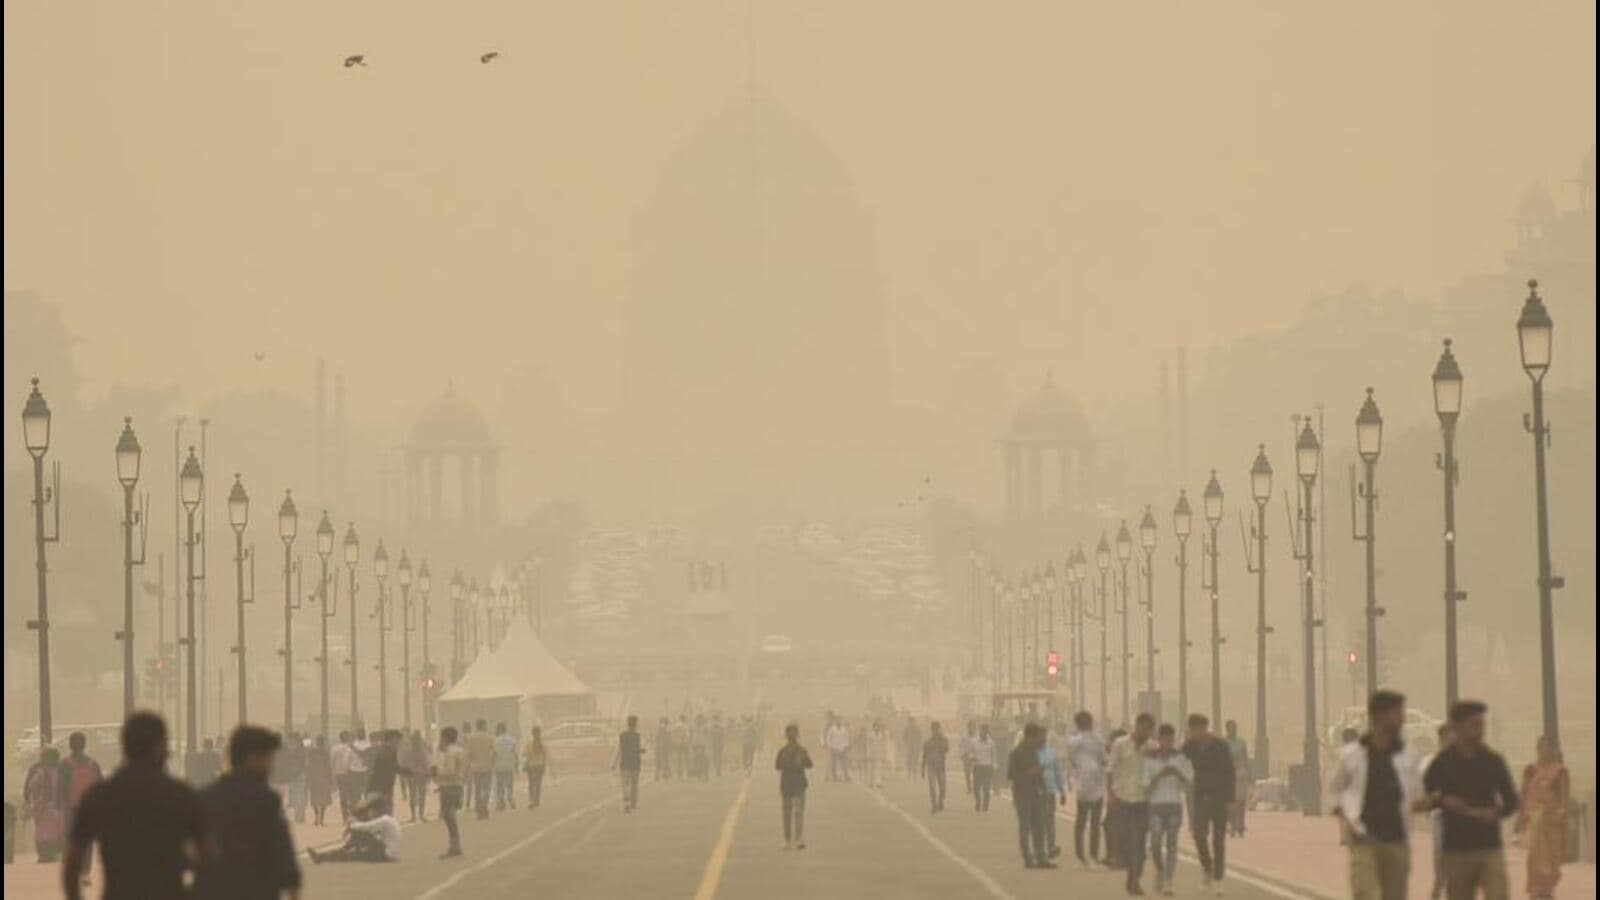 Delhis Pollution Levels Can Have Lasting Health Effects Latest News India Hindustan Times 5836